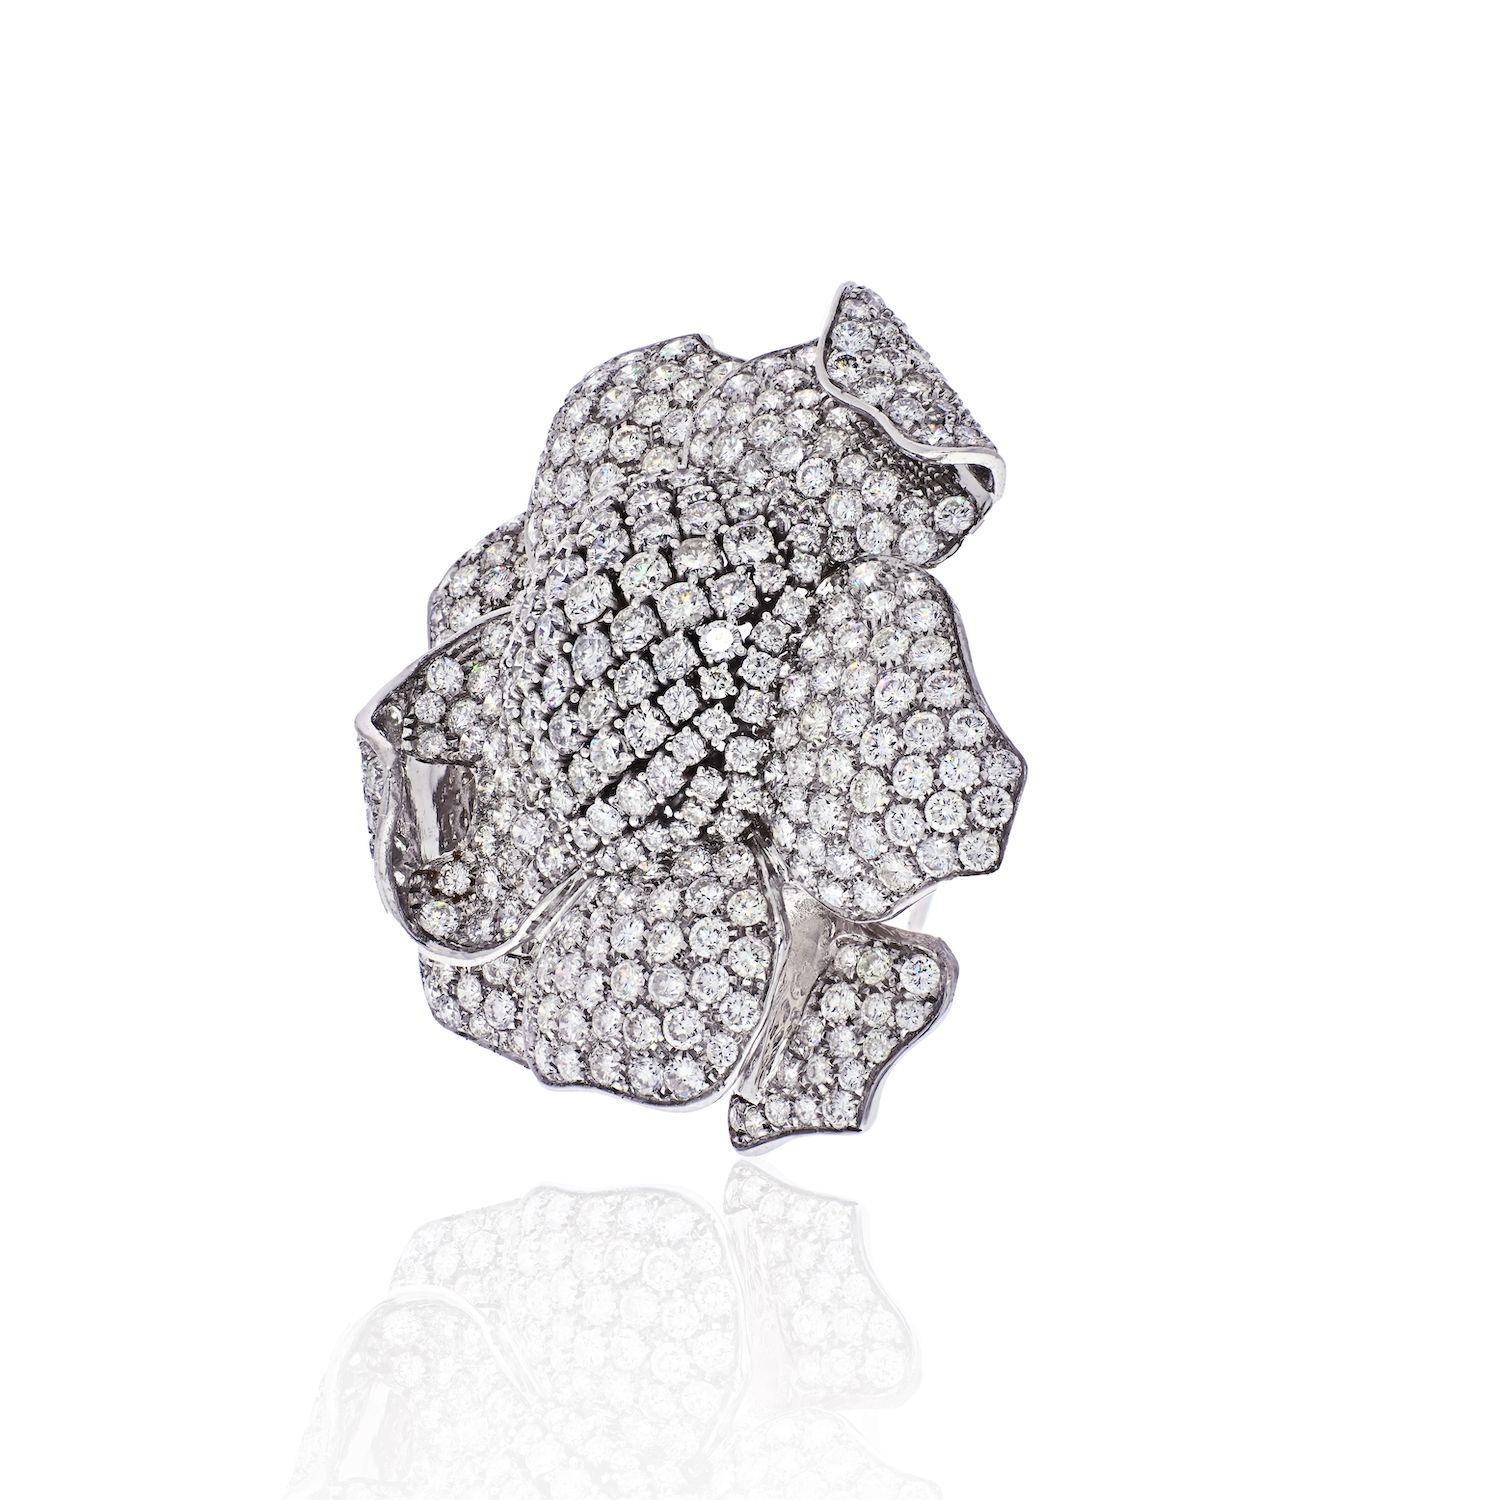 Stunning flower brooch encrusted with numerous round cut diamonds crafted in 18k white gold. It has the perfect balance between bold and classy making it the ideal evening statement piece. It is 2.5 inches wide. 
Diamond Carat Weight: 35cttw